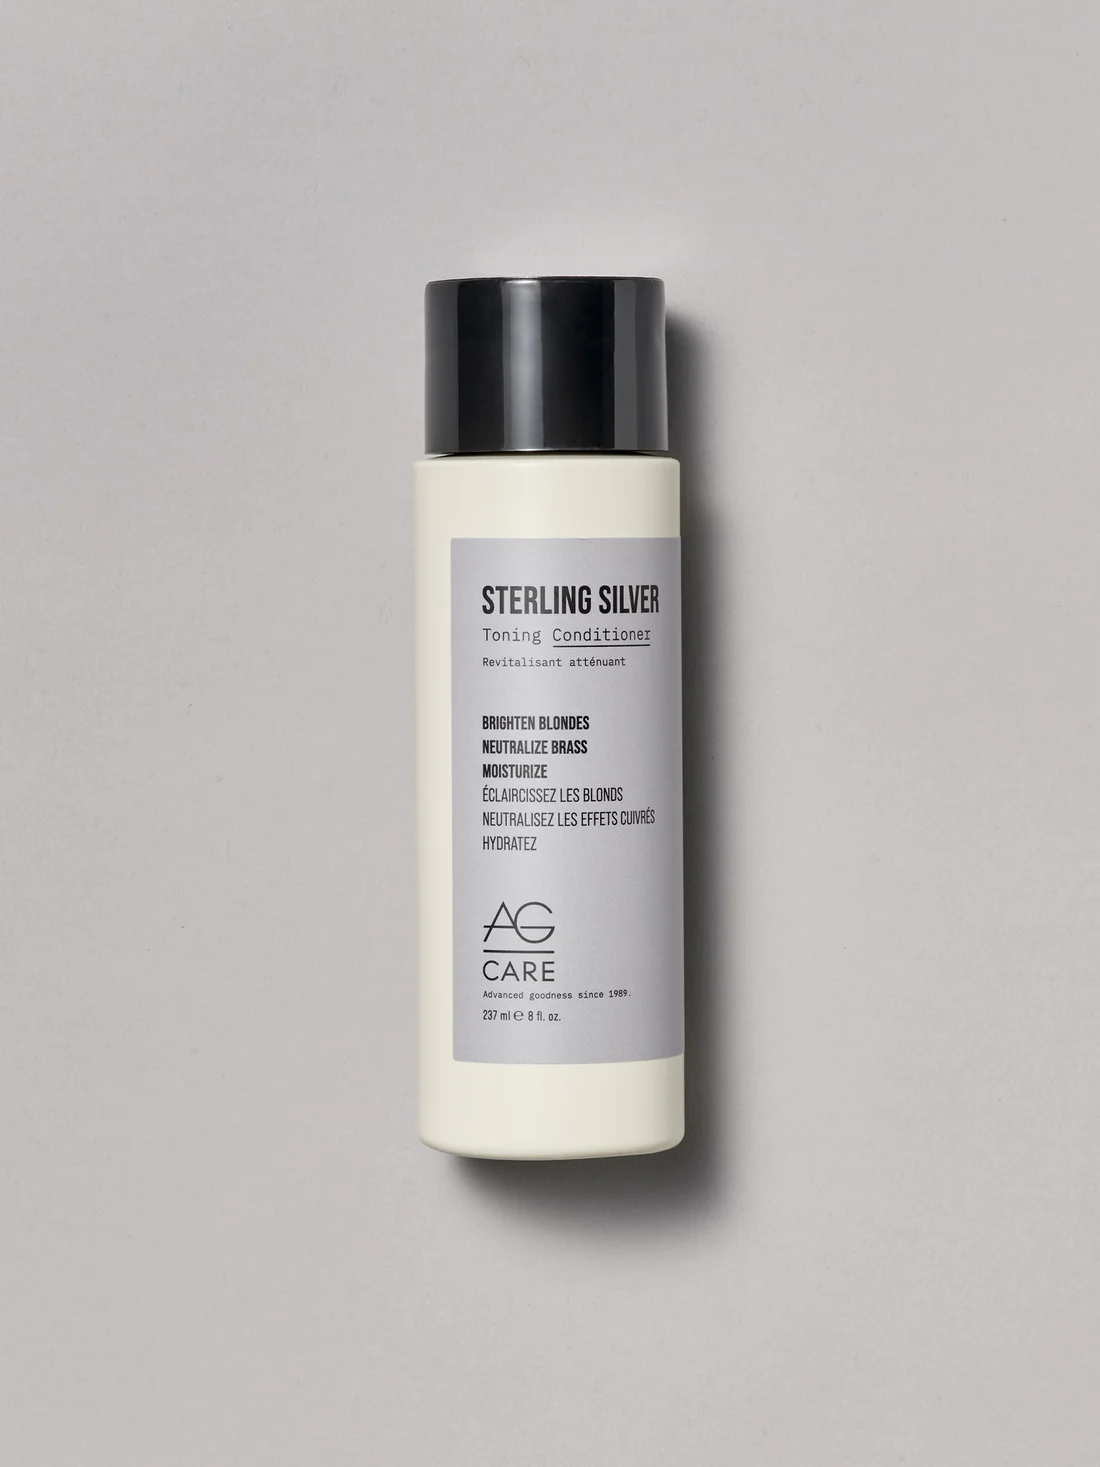 AG Care Sterling Silver Toning Conditioner, 8 fl oz - $26.00